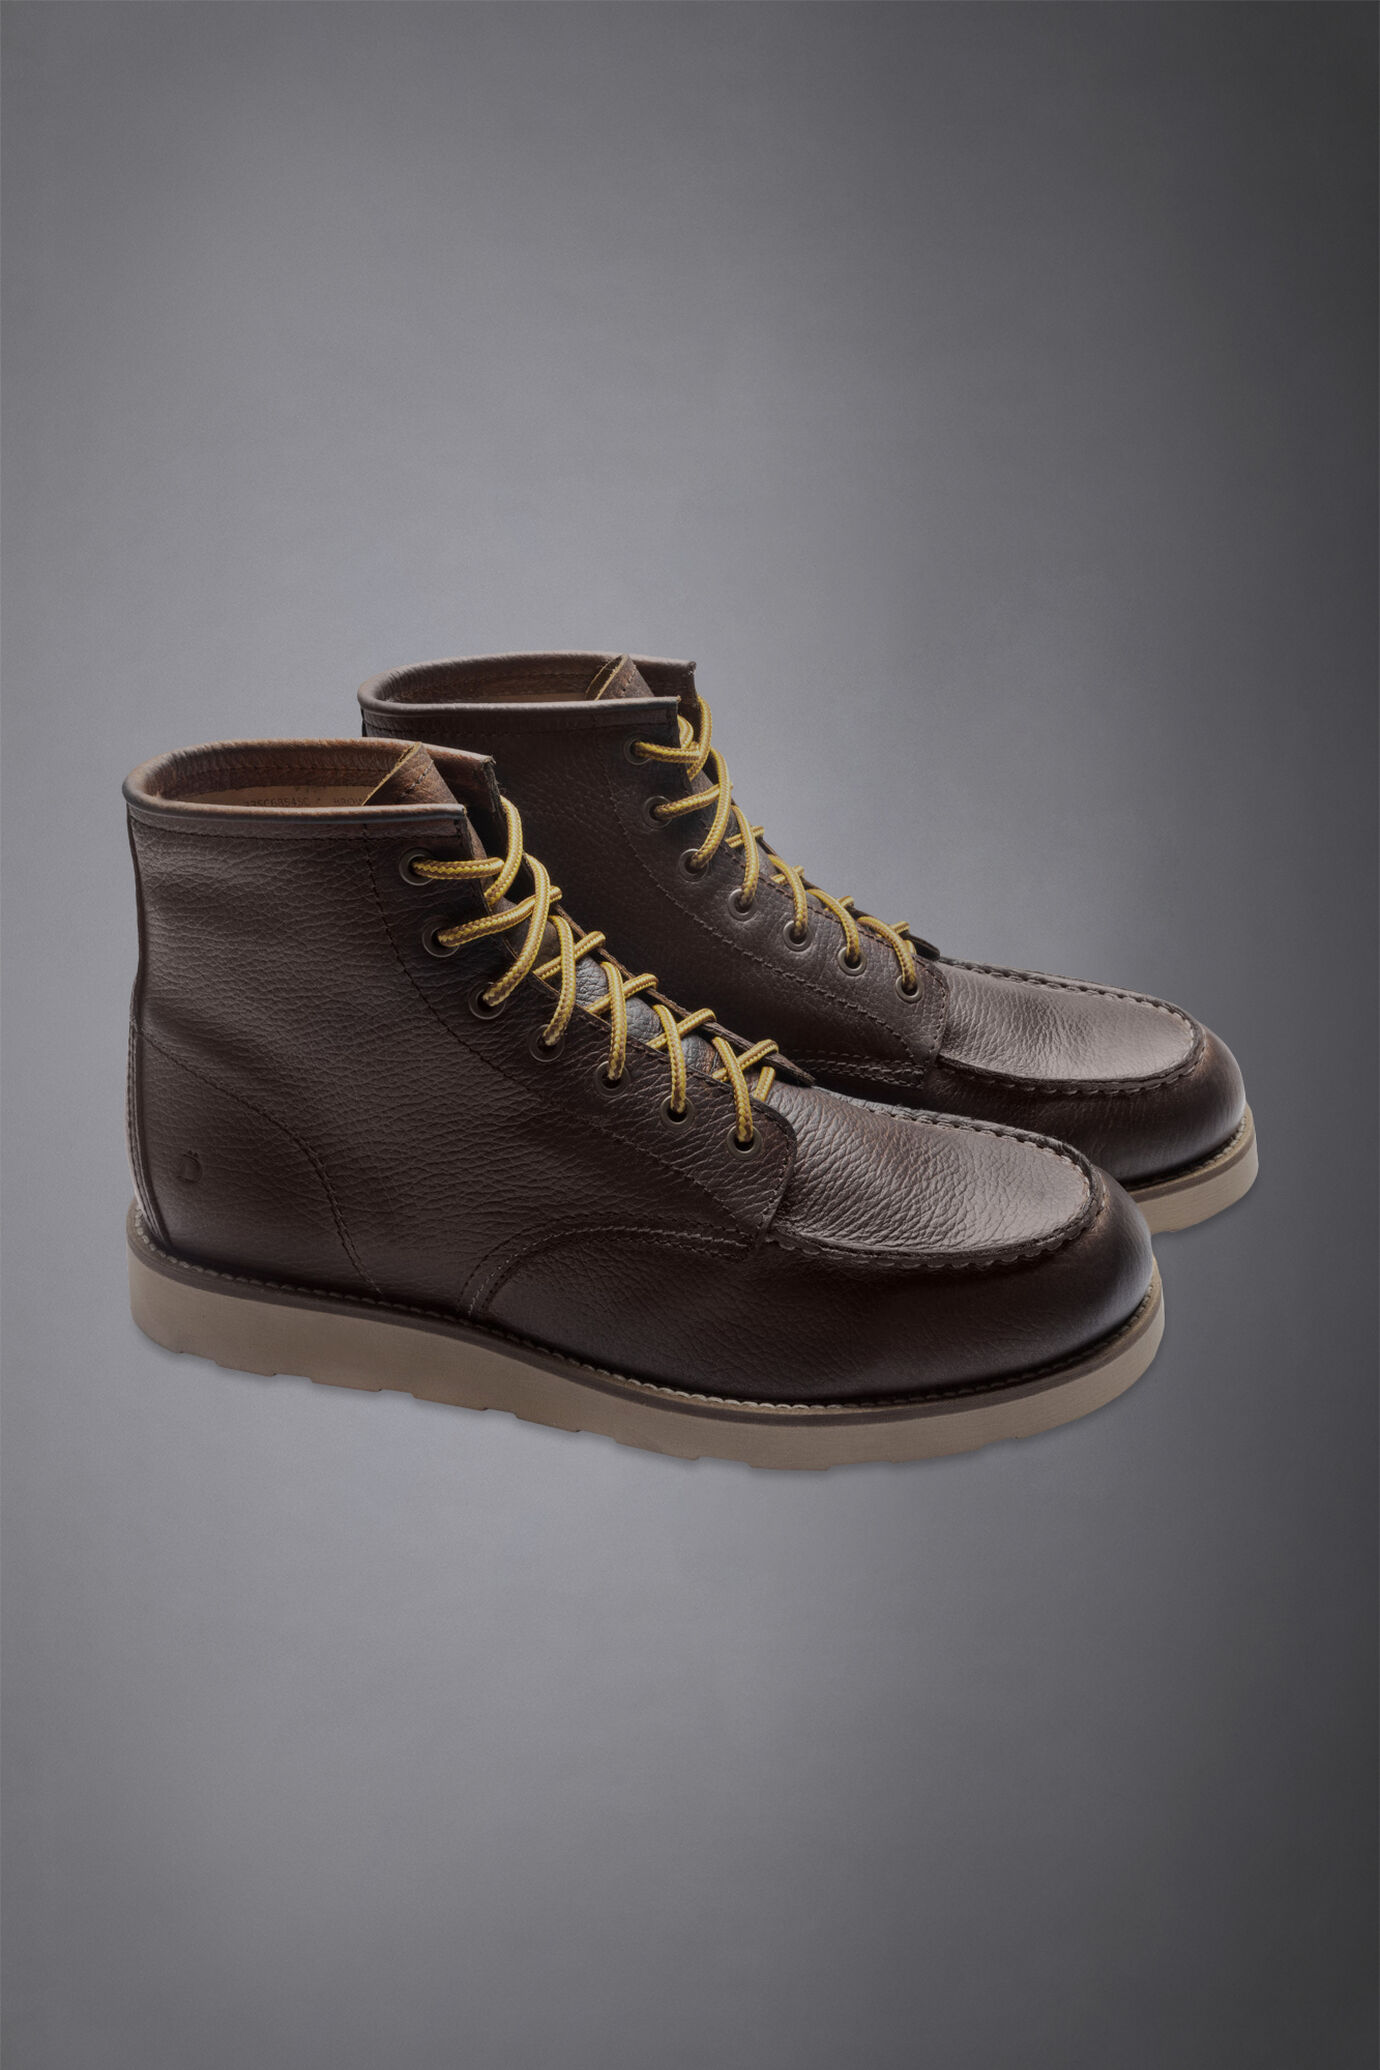 Men's 100% tumbled leather boots with rubber sole